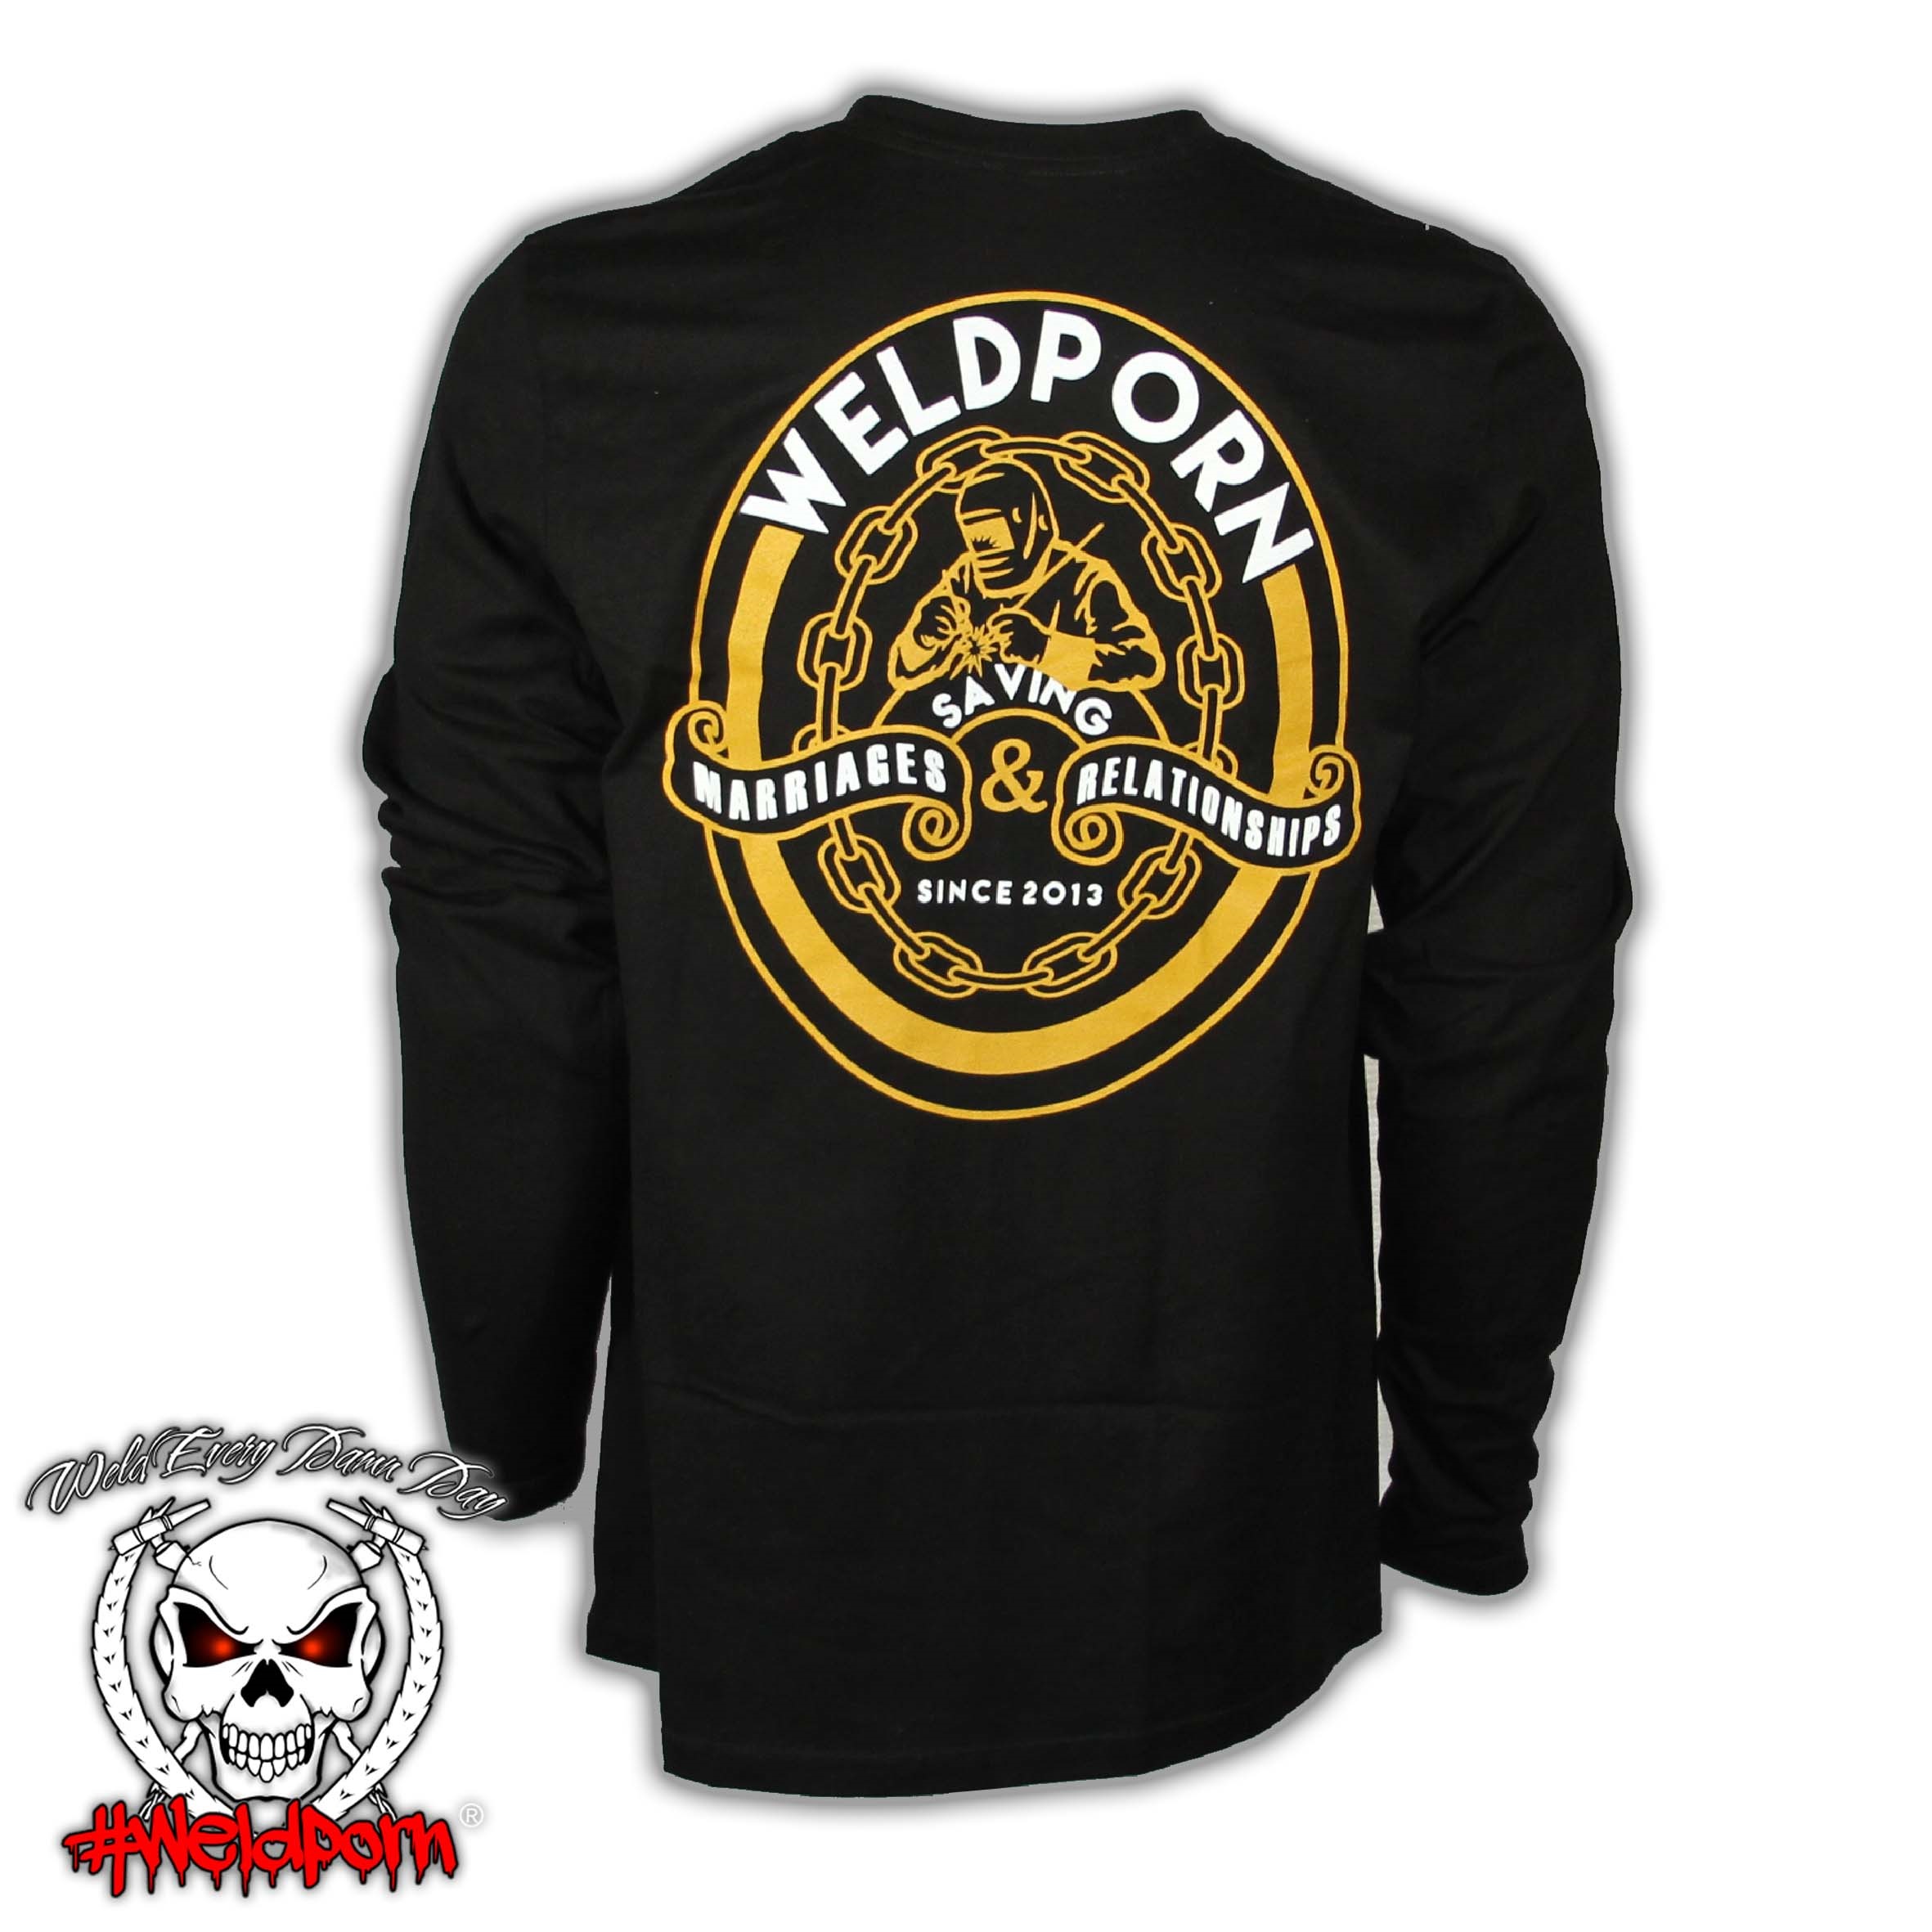 Weldporn Saving Marriages Long Sleeve Tee Large